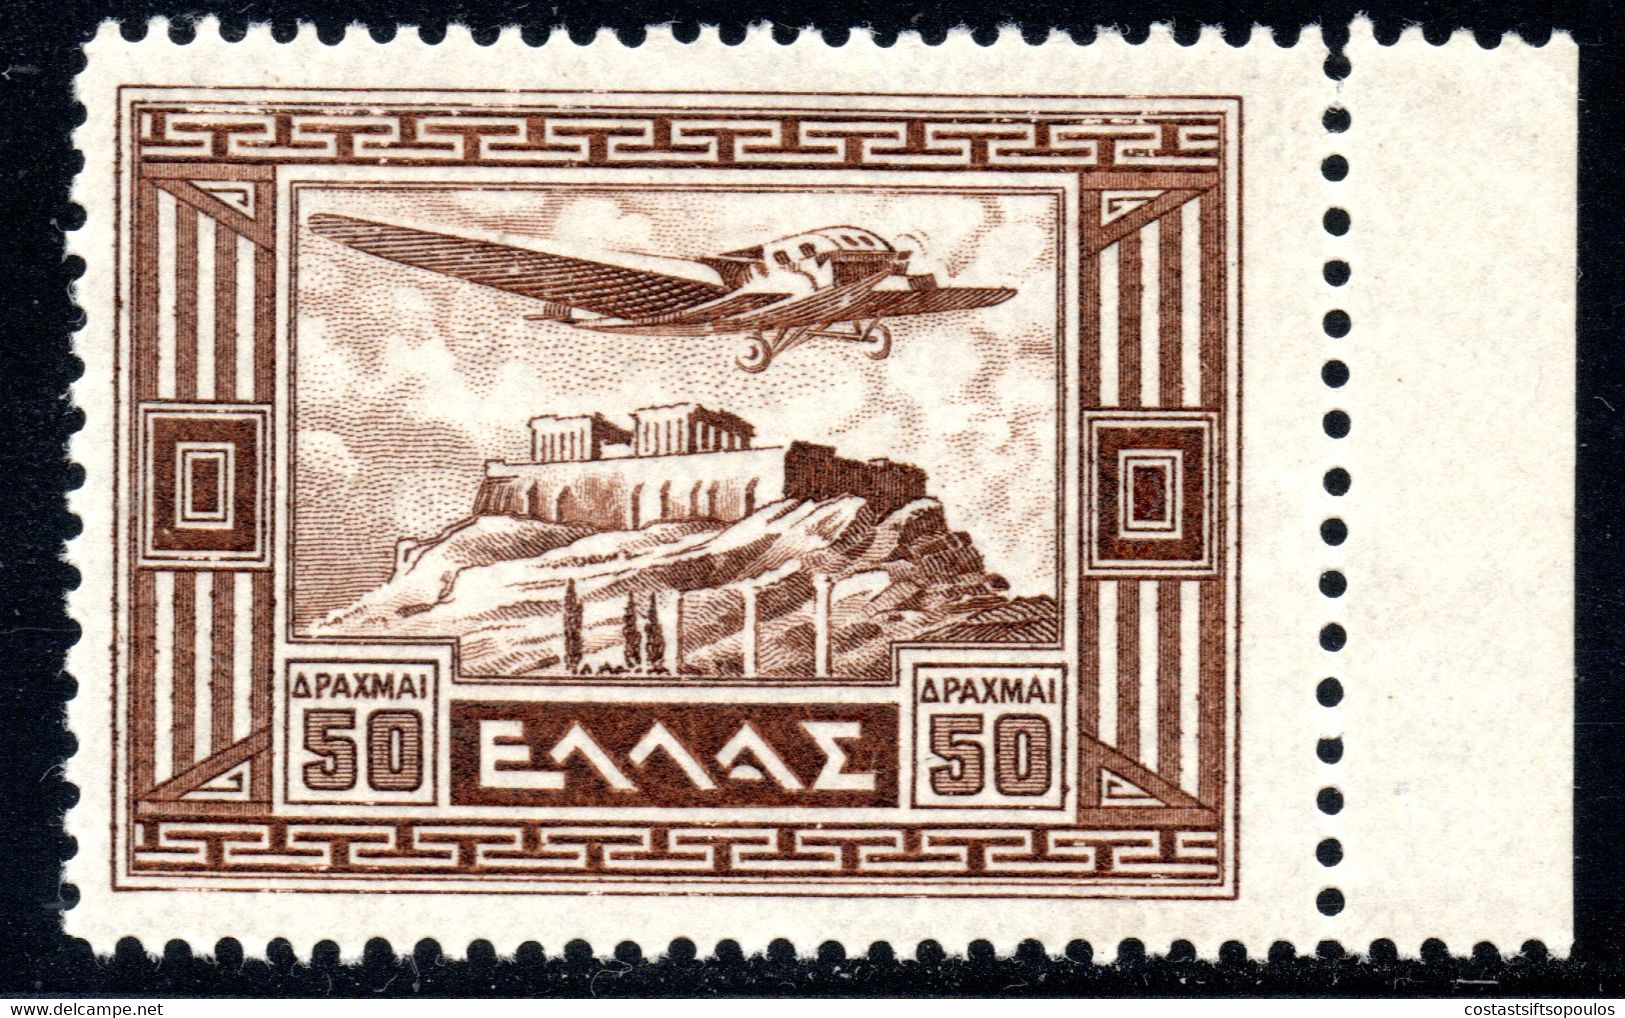 1413. GREECE 1933 AIR MAIL 50 DR. # 21 MNH. AIRPLANE OVER ACROPOLIS - Neufs